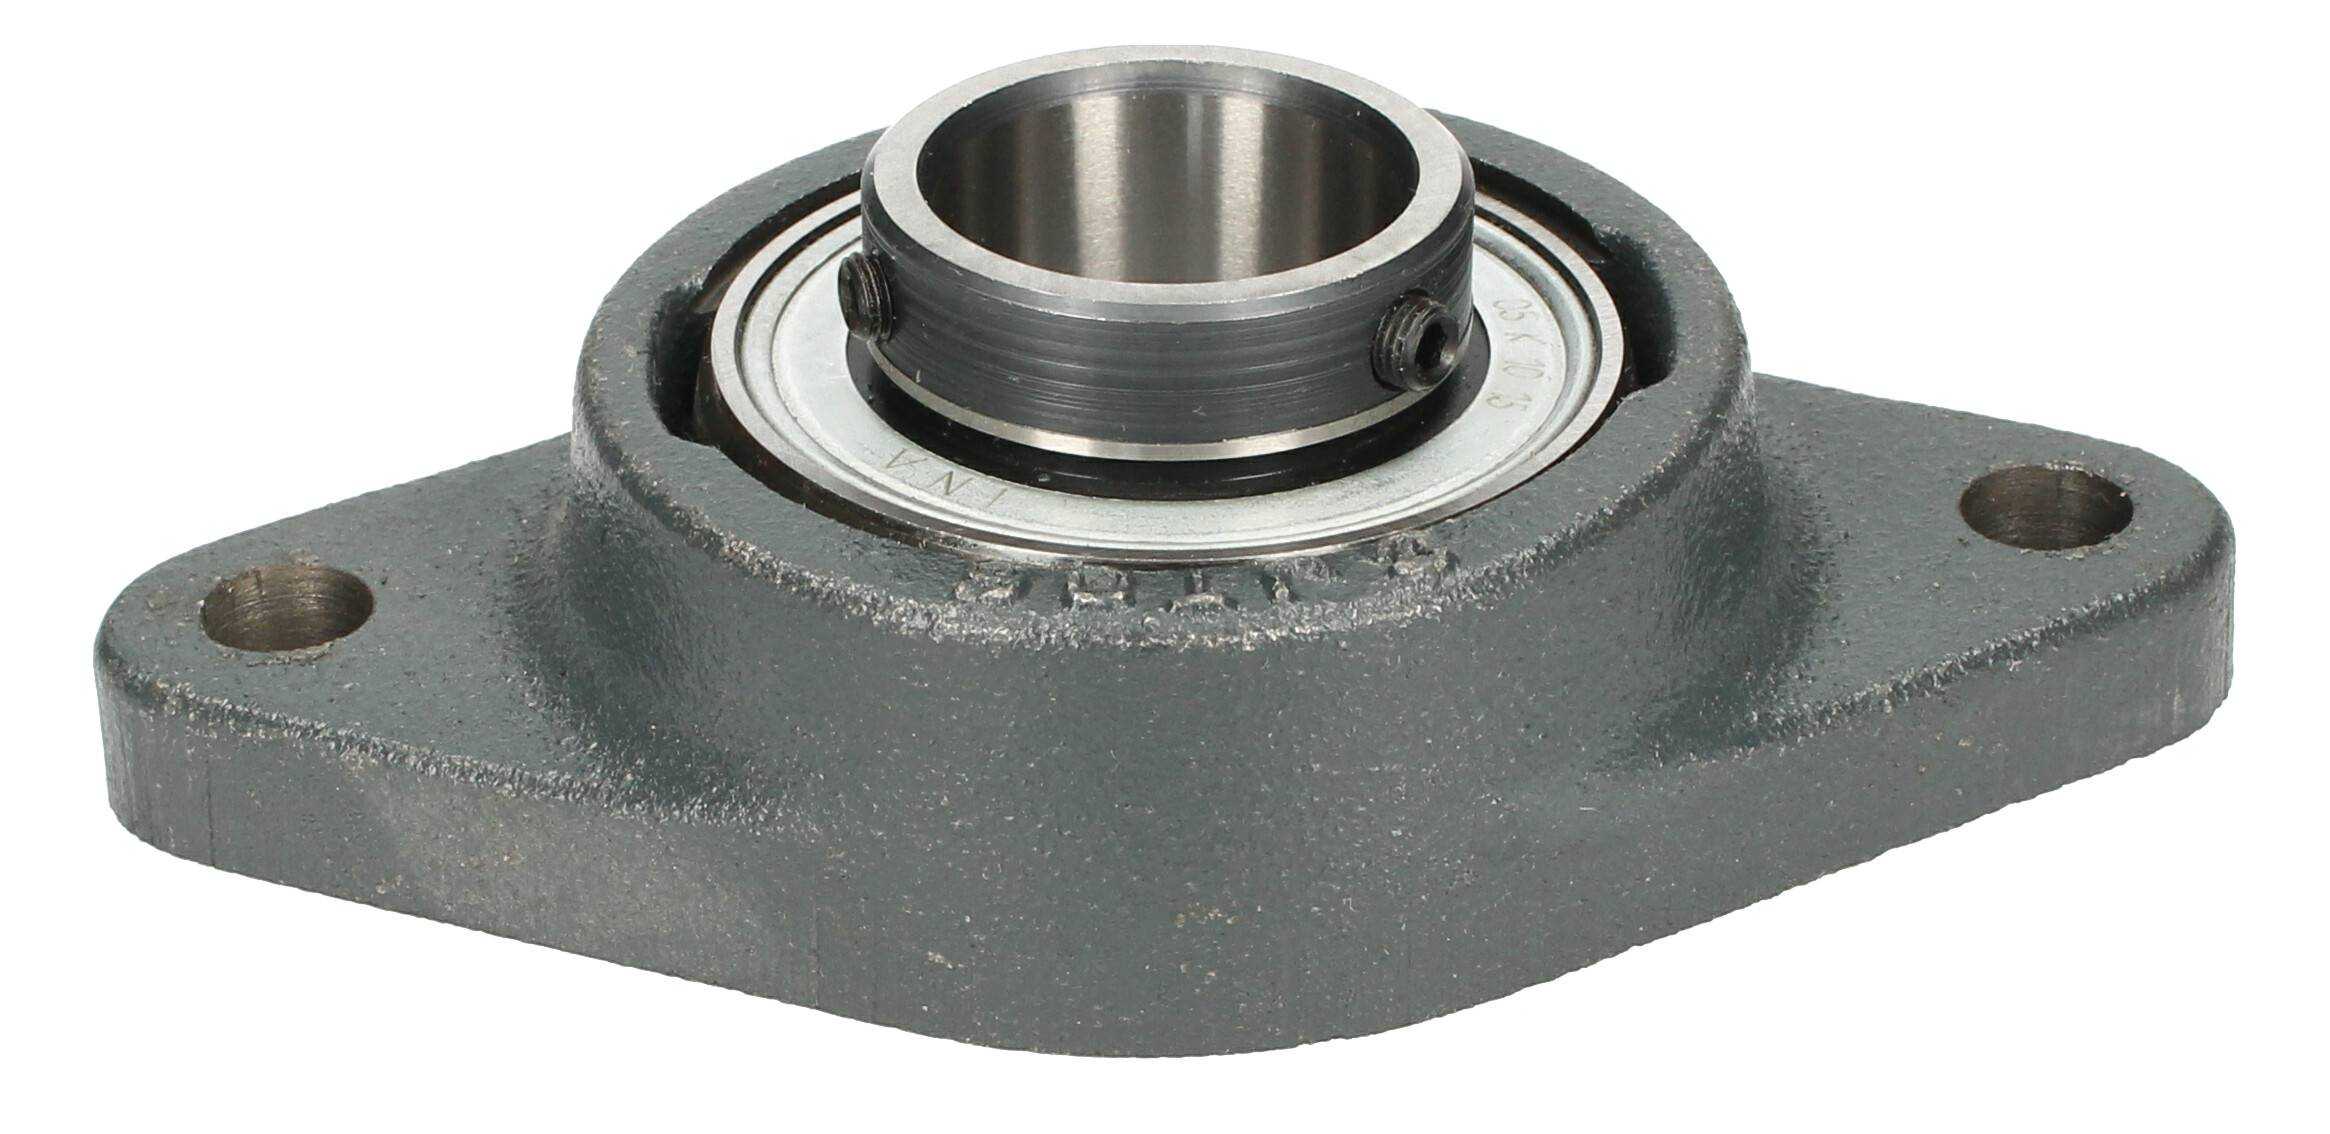 BEARING MOUNT TYPE UCFL-206-INA (RECONDITIONED) - Image 1